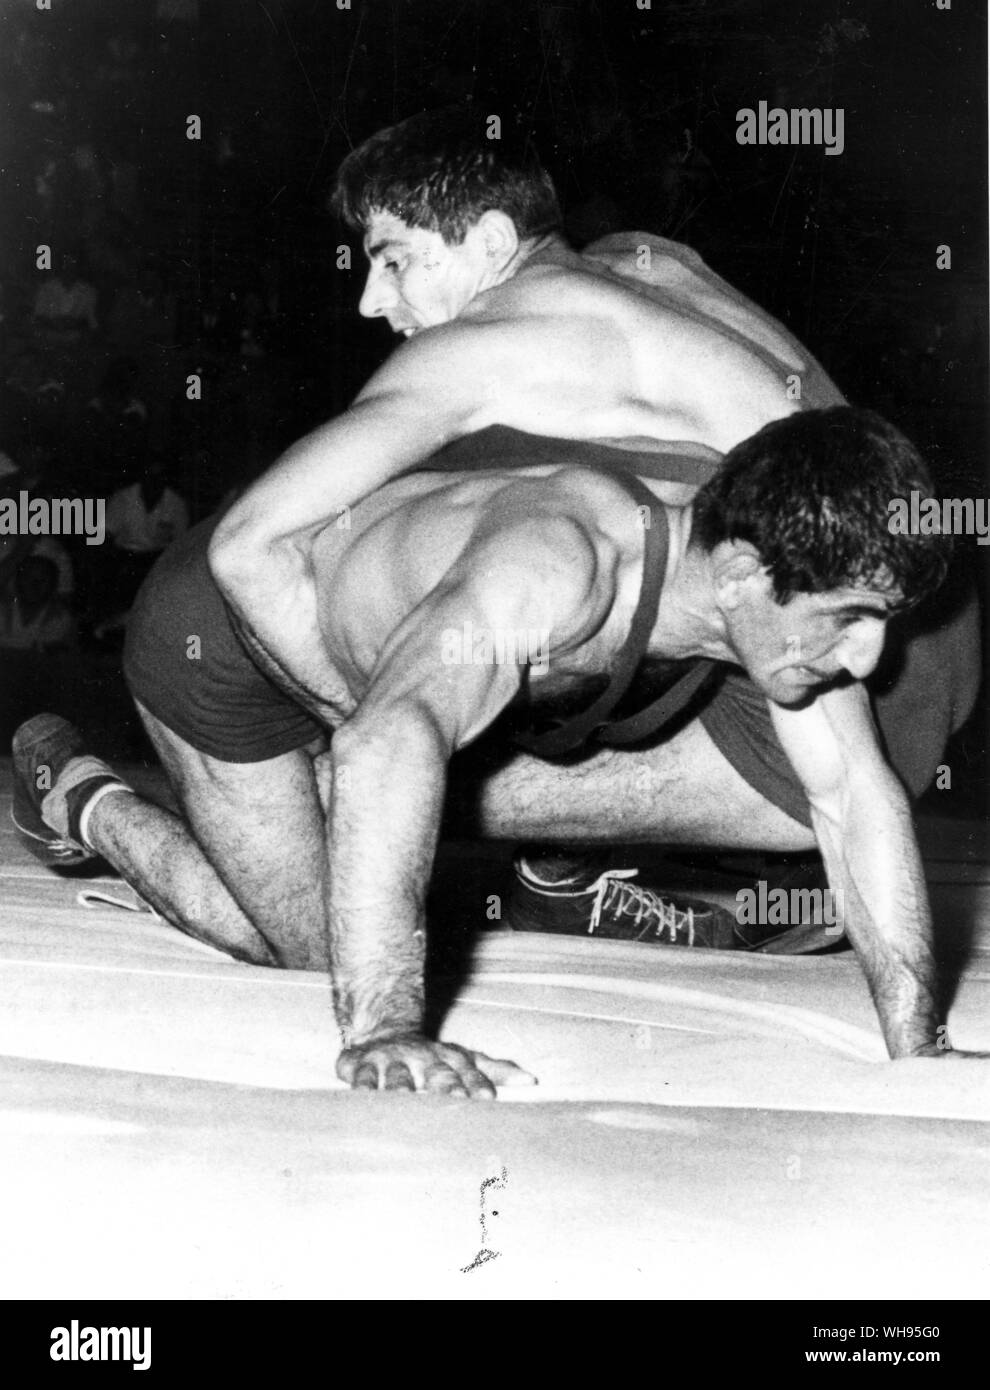 Italy, Rome, Olympic Games, 1960: Mithat Bayrak of Turkey (lower) and Rene Schiermeyer of France during their bout in the welterweight class in the Greco-Roman wrestling competition. Bayrak took the gold medal with German, Maritschnig in second place.. Stock Photo